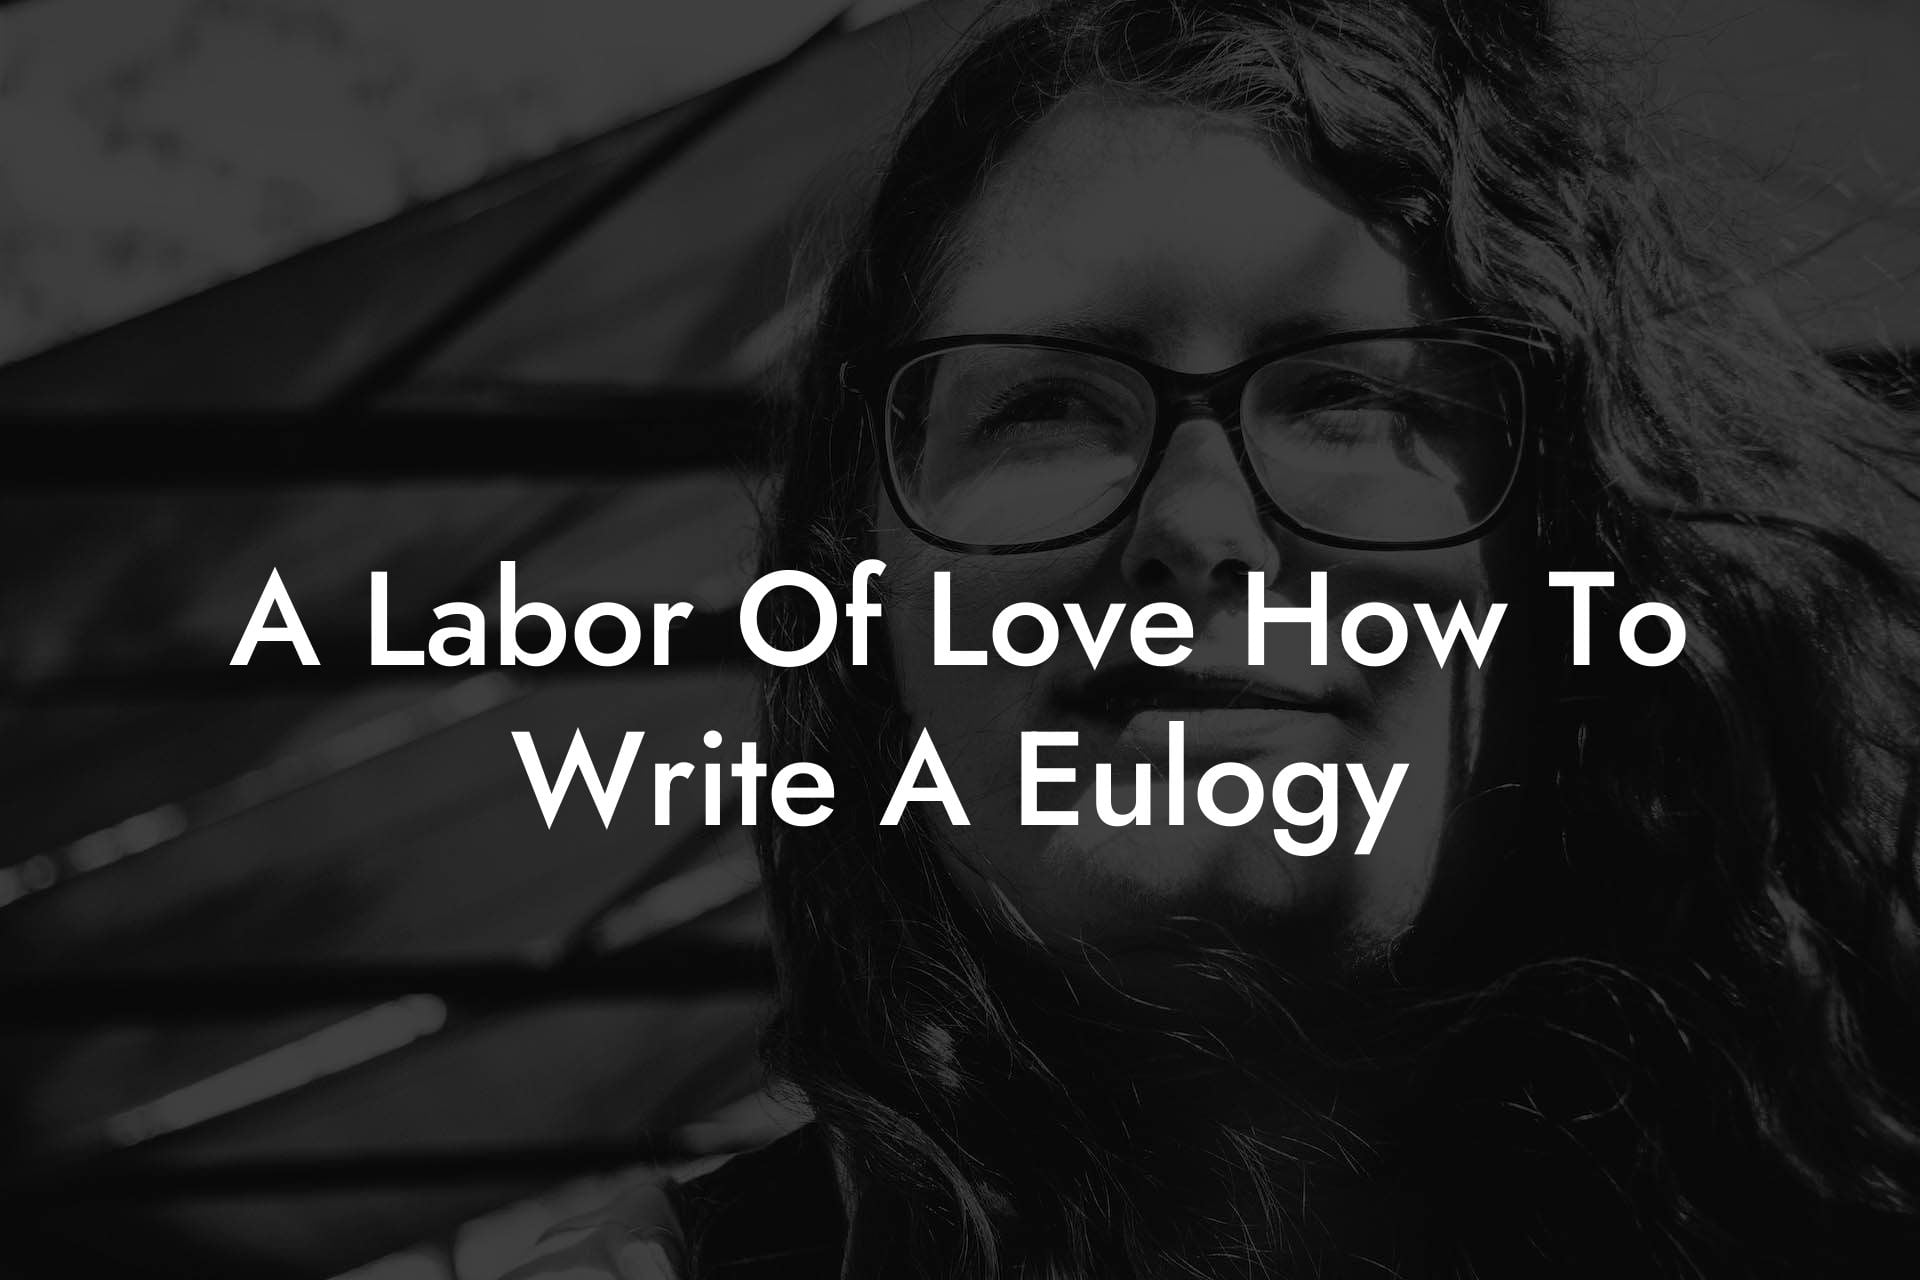 A Labor Of Love How To Write A Eulogy